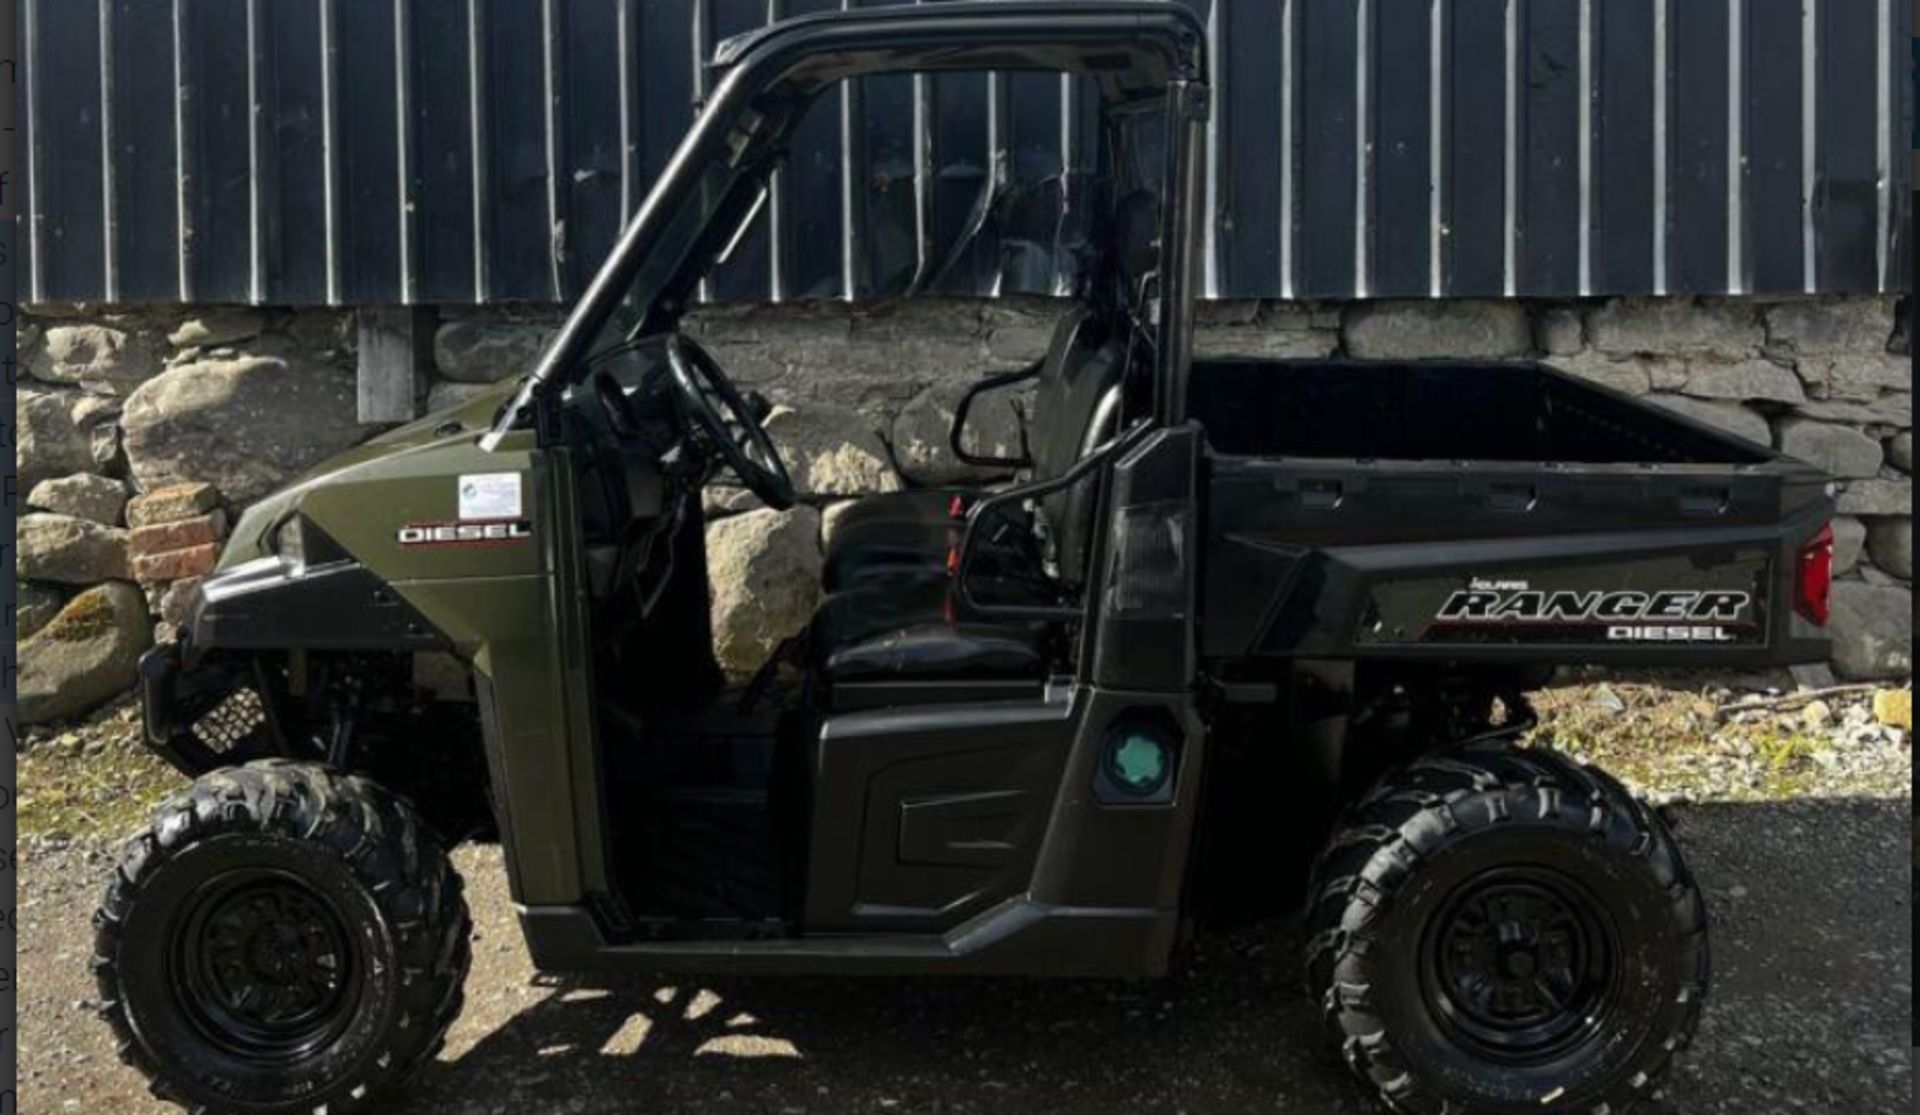 2018 RANGER 1000D: THE PERFECT UTV FOR YOUR FARM - Image 10 of 10